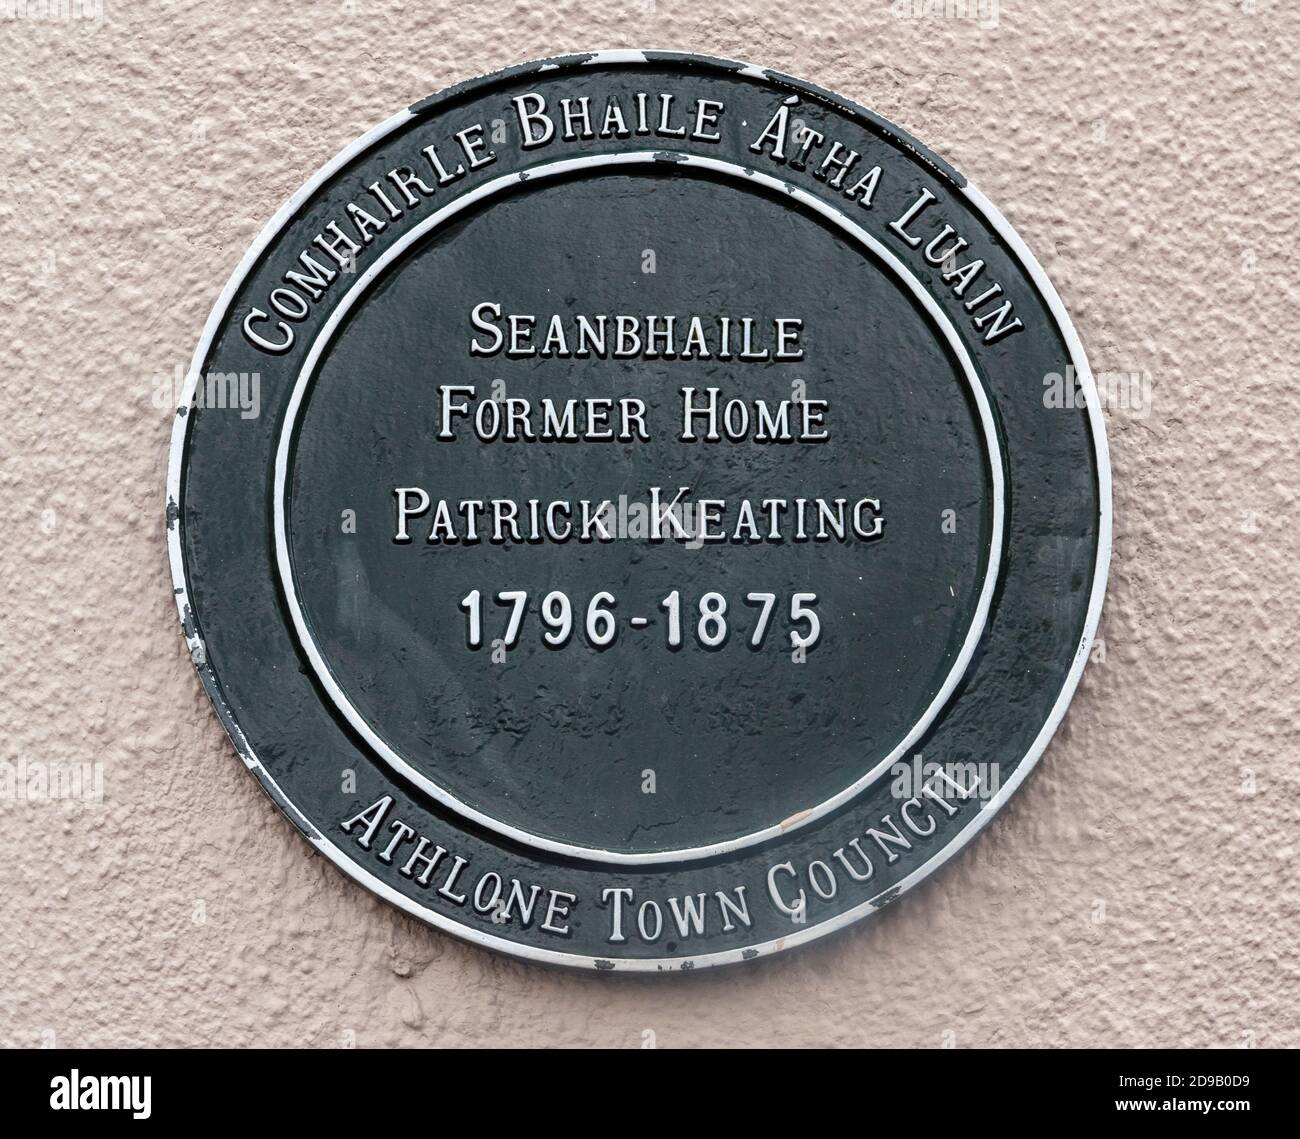 Heritage green plaque at Seanbhaile former home of Patrick Keating 1796 - 1875, Athlone, County Roscommon & County Westmeath, Ireland. Stock Photo